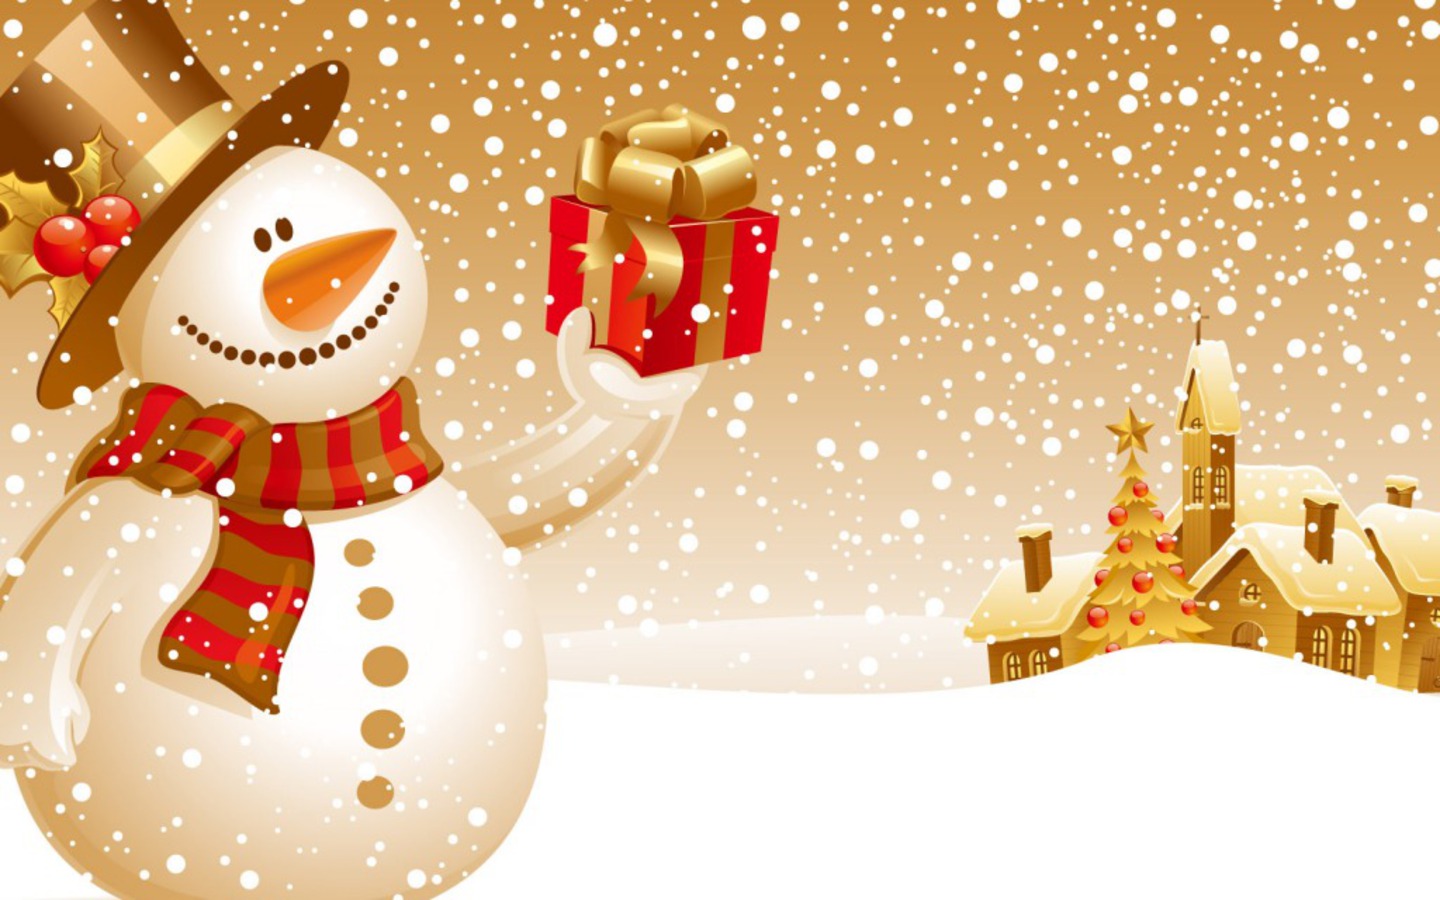 Cute Christmas Backgrounds 9269 Hd Wallpapers in Celebrations